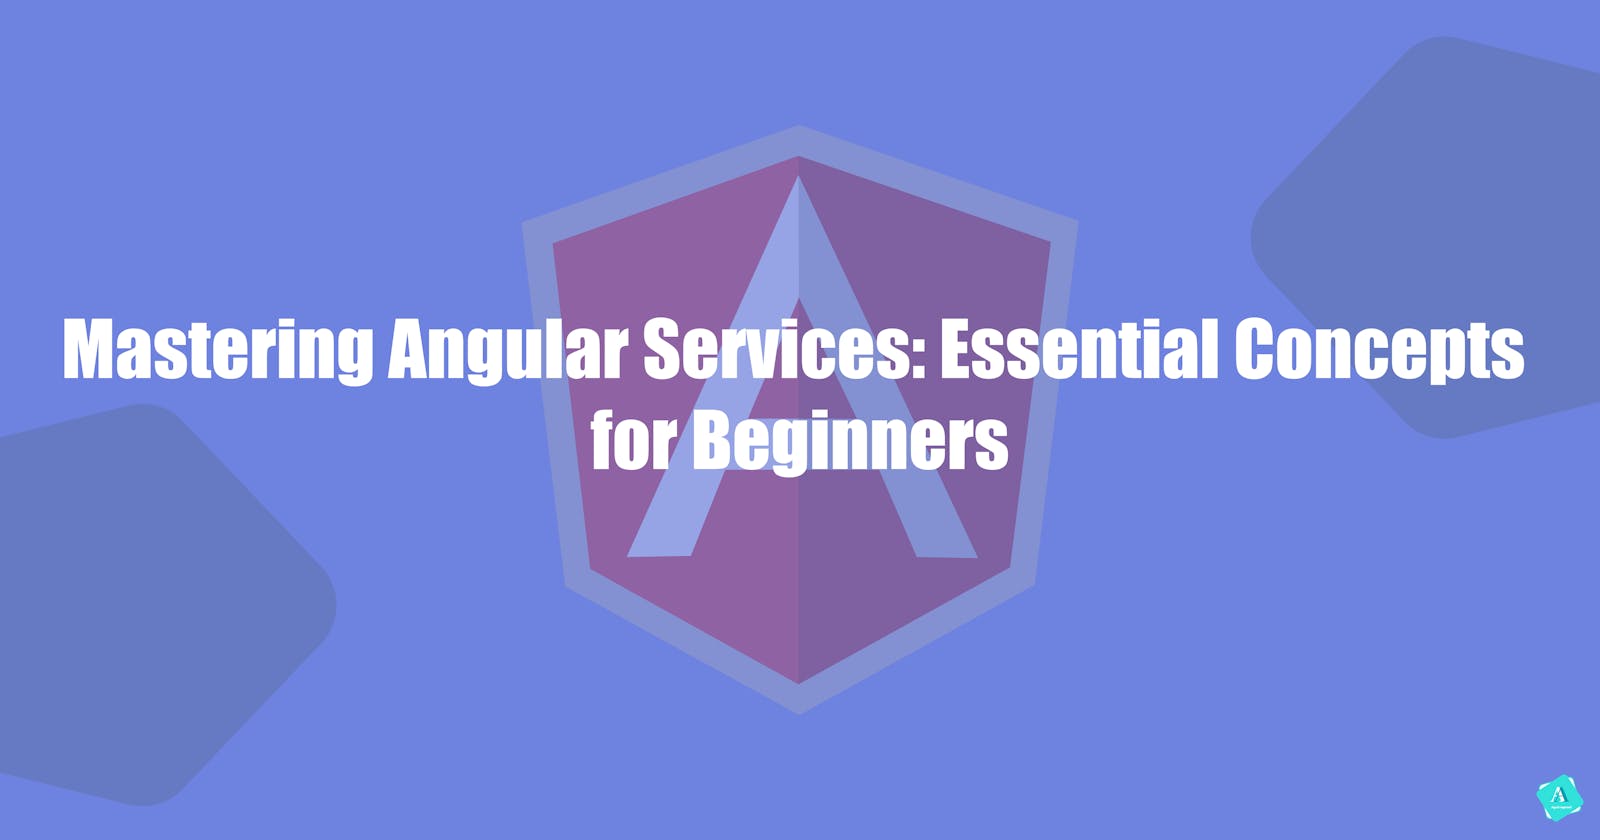 Mastering Angular Services: Essential Concepts for Beginners